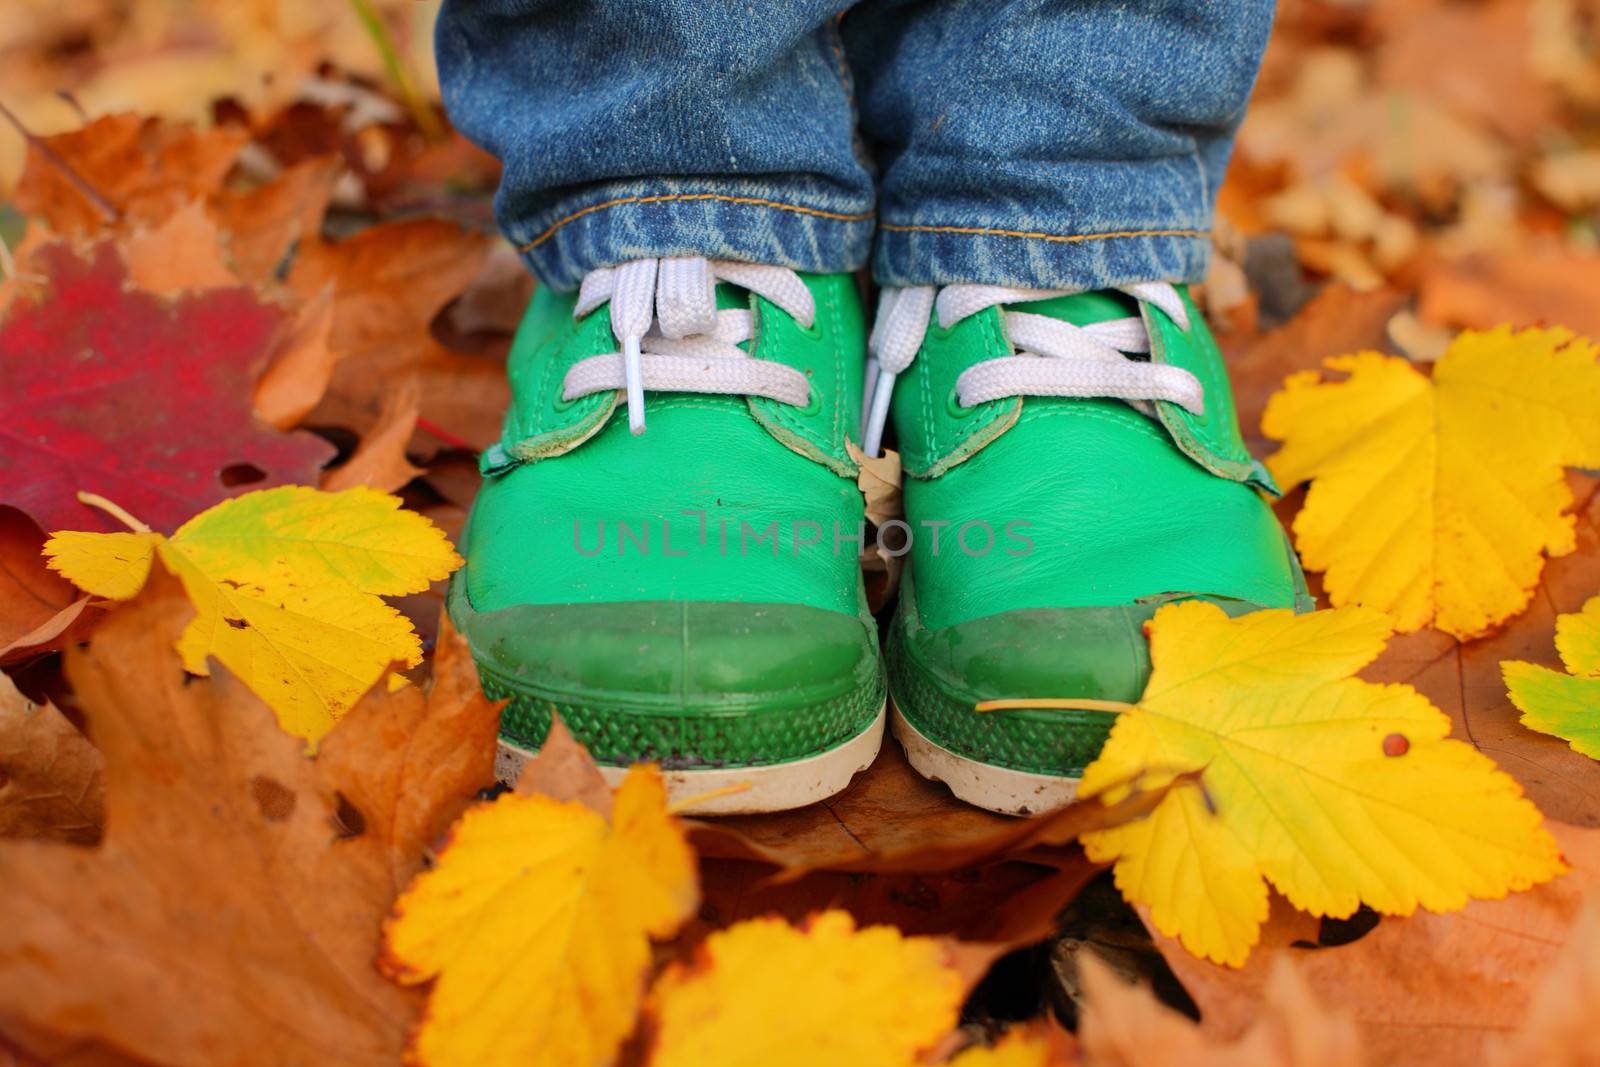 Green leather kids boots and yellow leaves